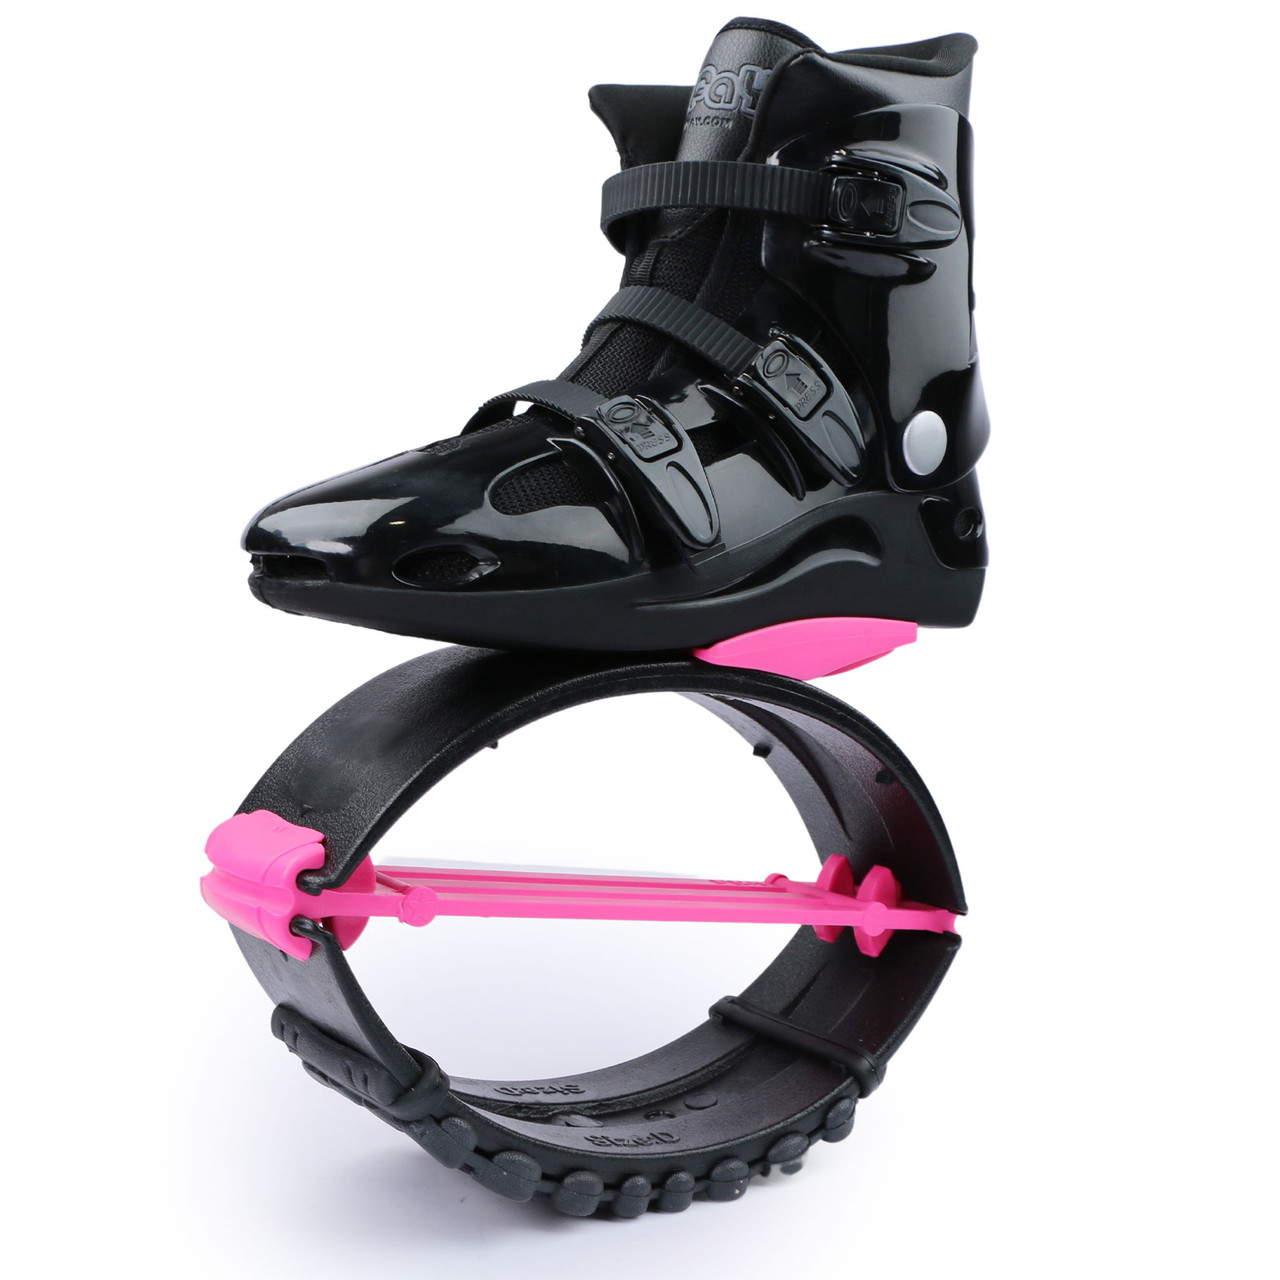 JOYFAY Black/Pink Jumping Shoes- Unisex Fitness Jump Shoes Bounce